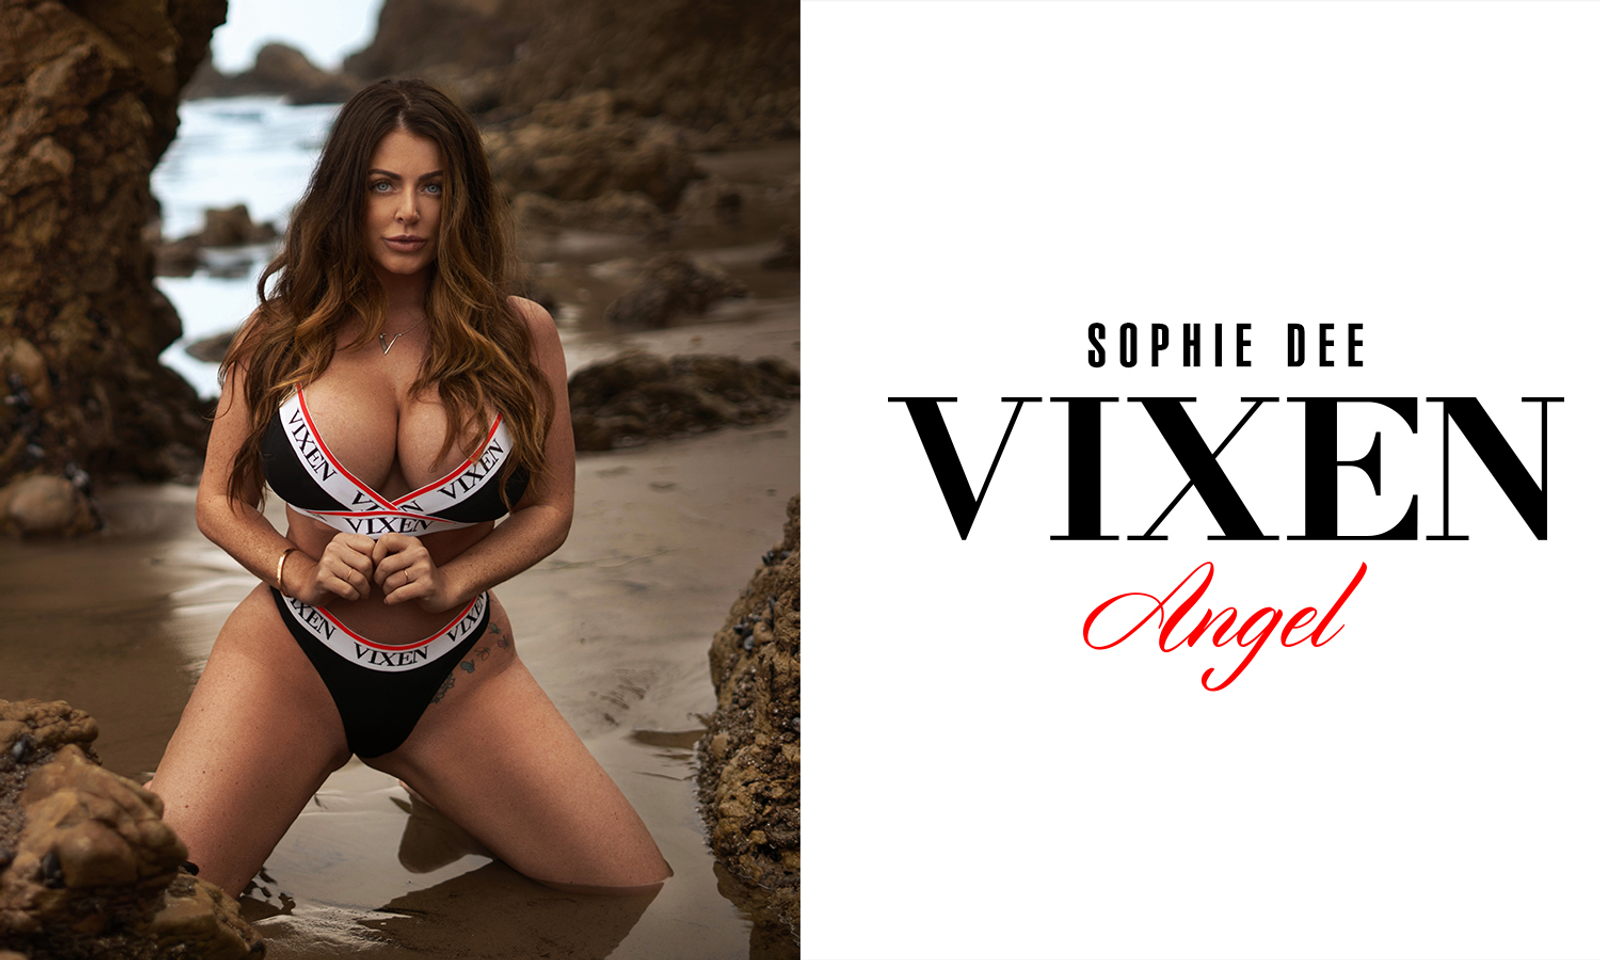 Sophie Dee was named the newest Vixen Angel Saturday night in a ceremony li...